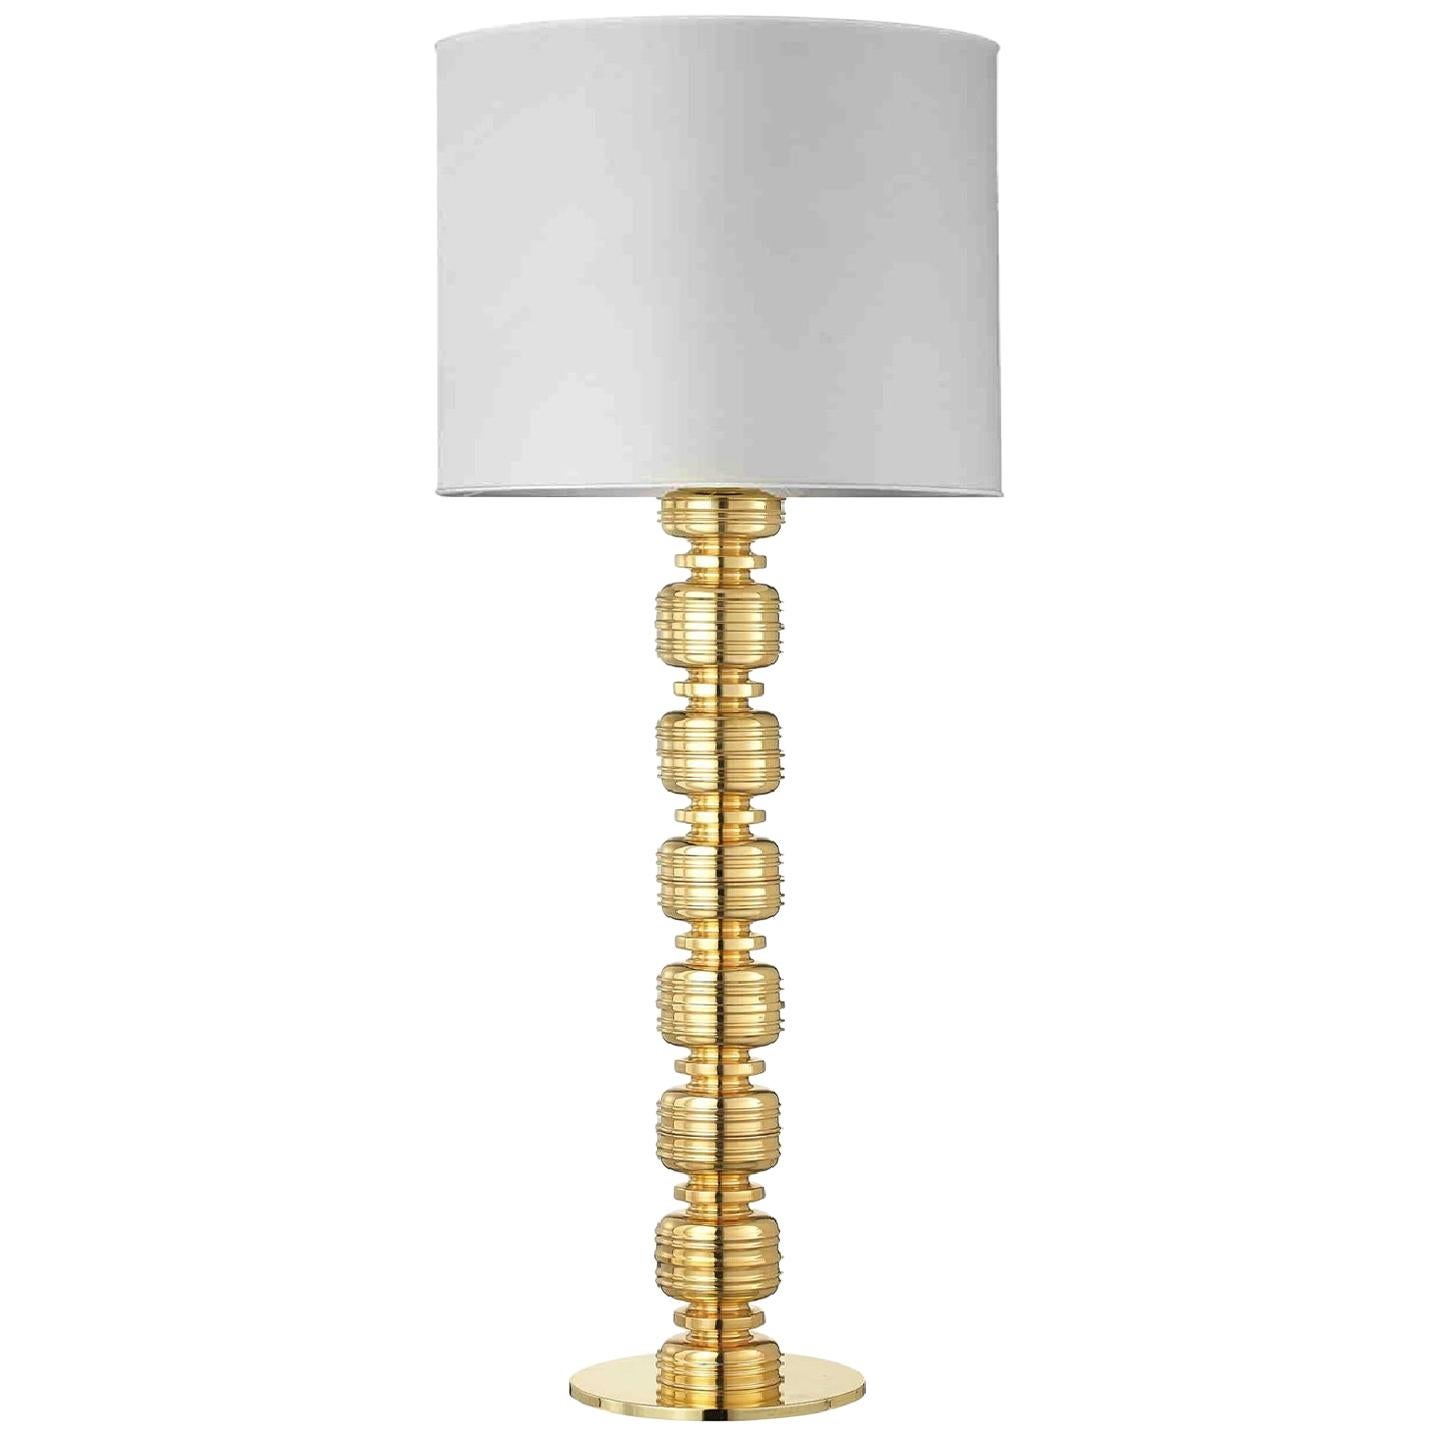 THEA 3, Ceramic Lamp Handcrafted in 24-Karat Gold by Gabriella B. Made in Italy For Sale